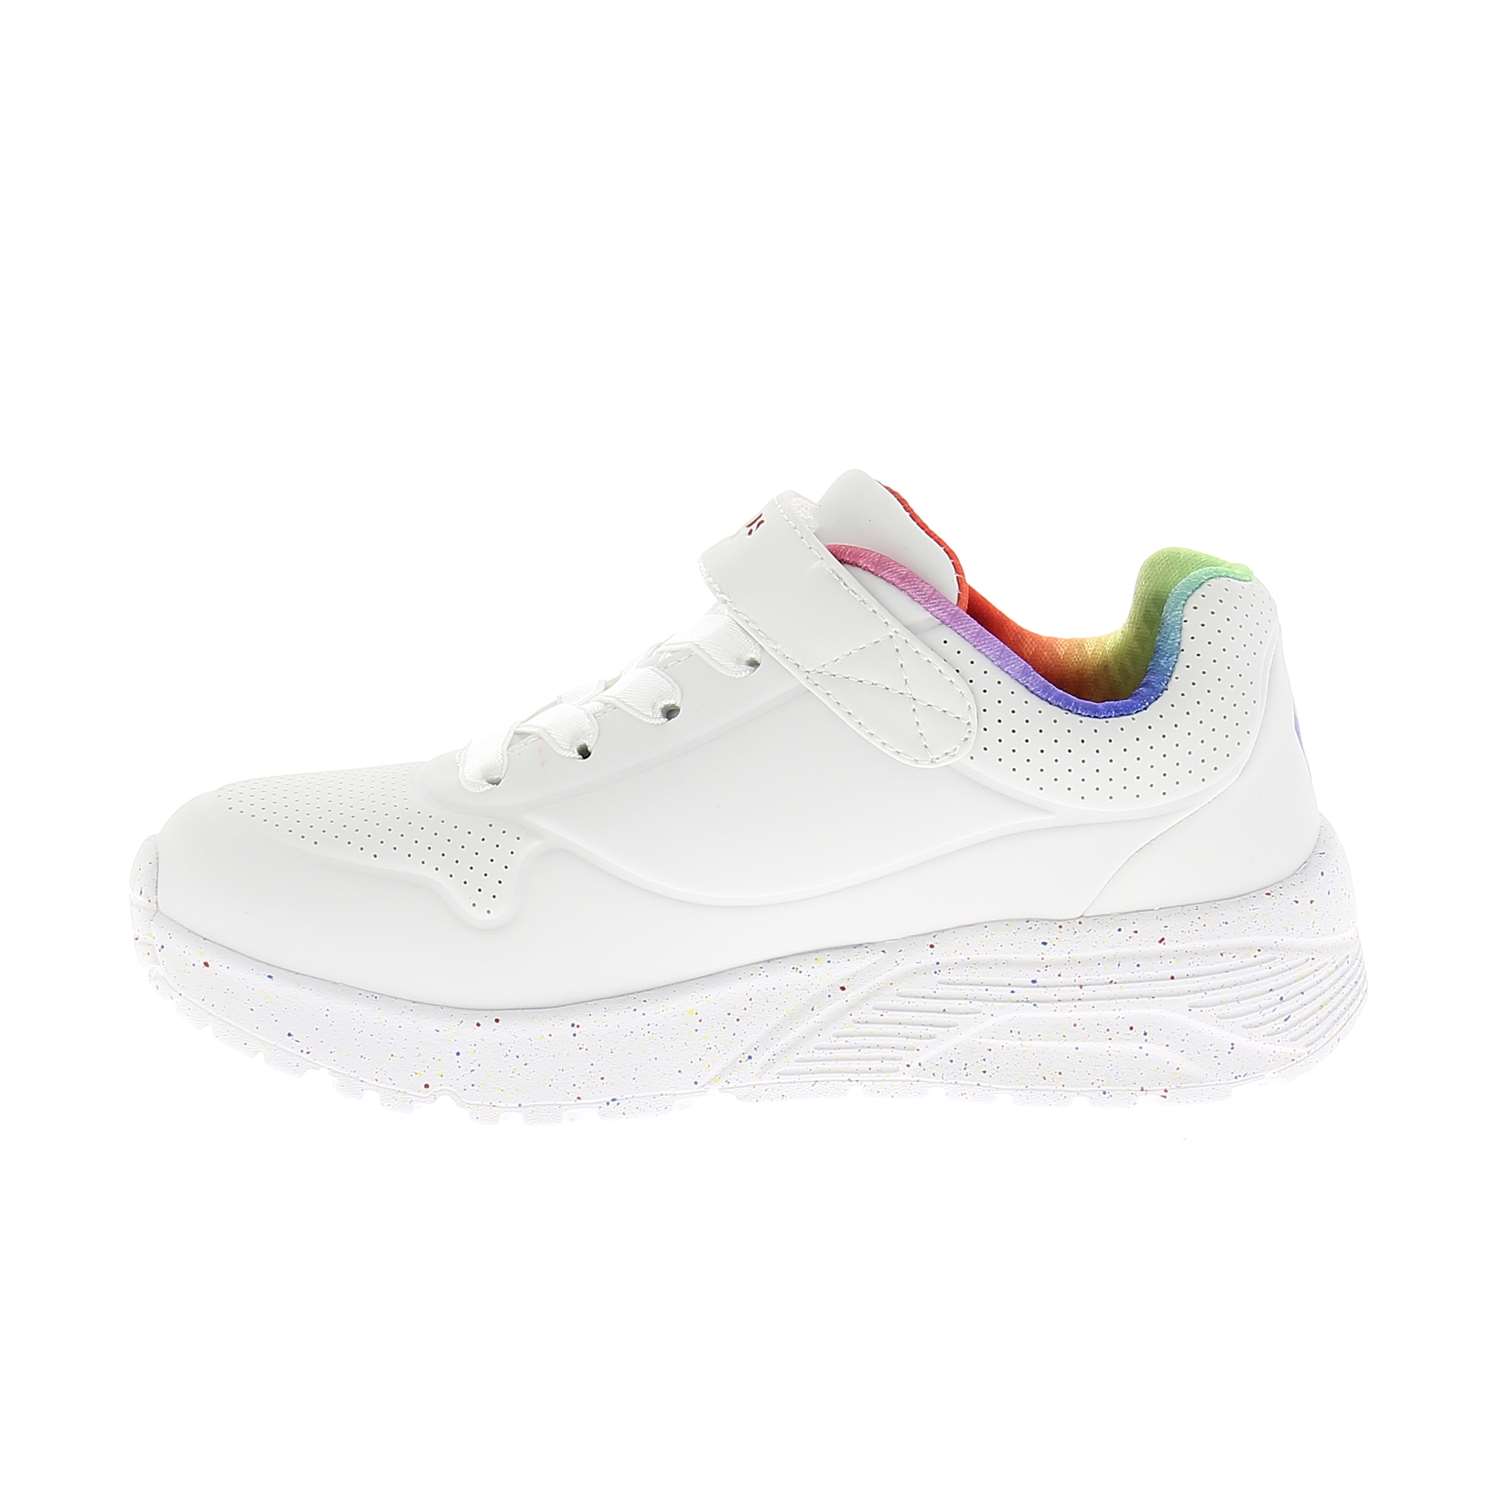 05 - UNO LIGHT - SKECHERS - Baskets - Synthétique